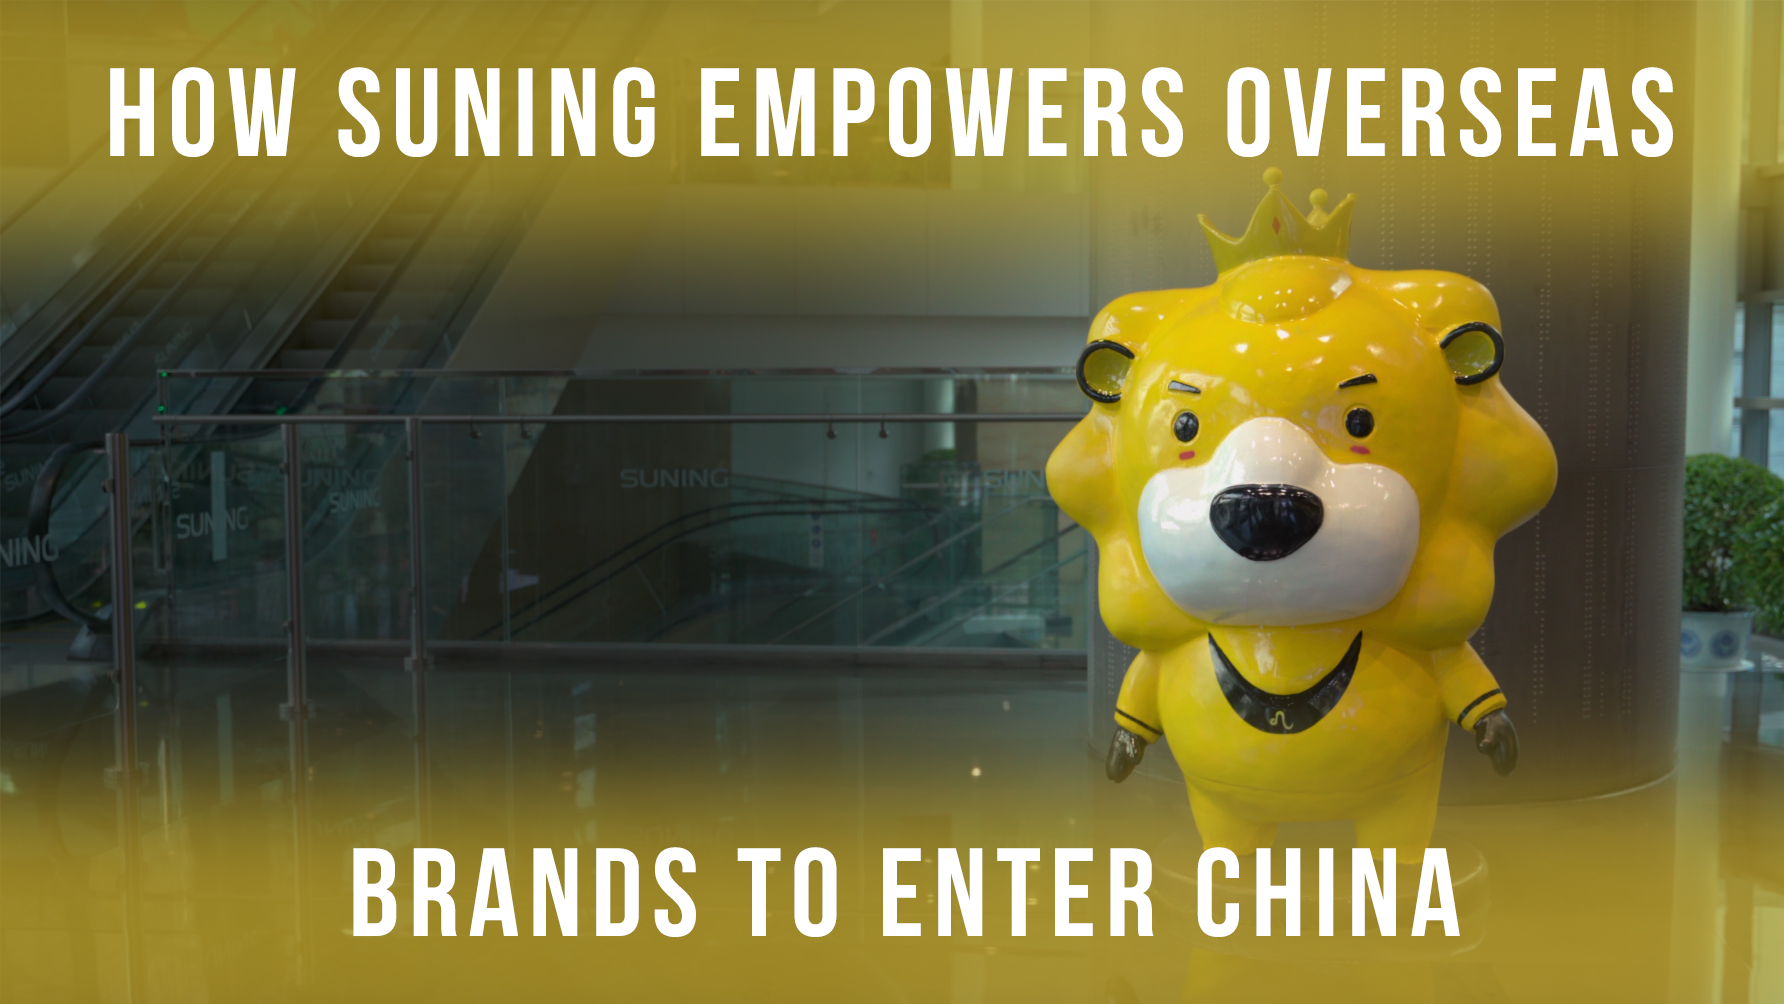 How Chinese Retailer Suning Empowers Overseas Brands to Enter China